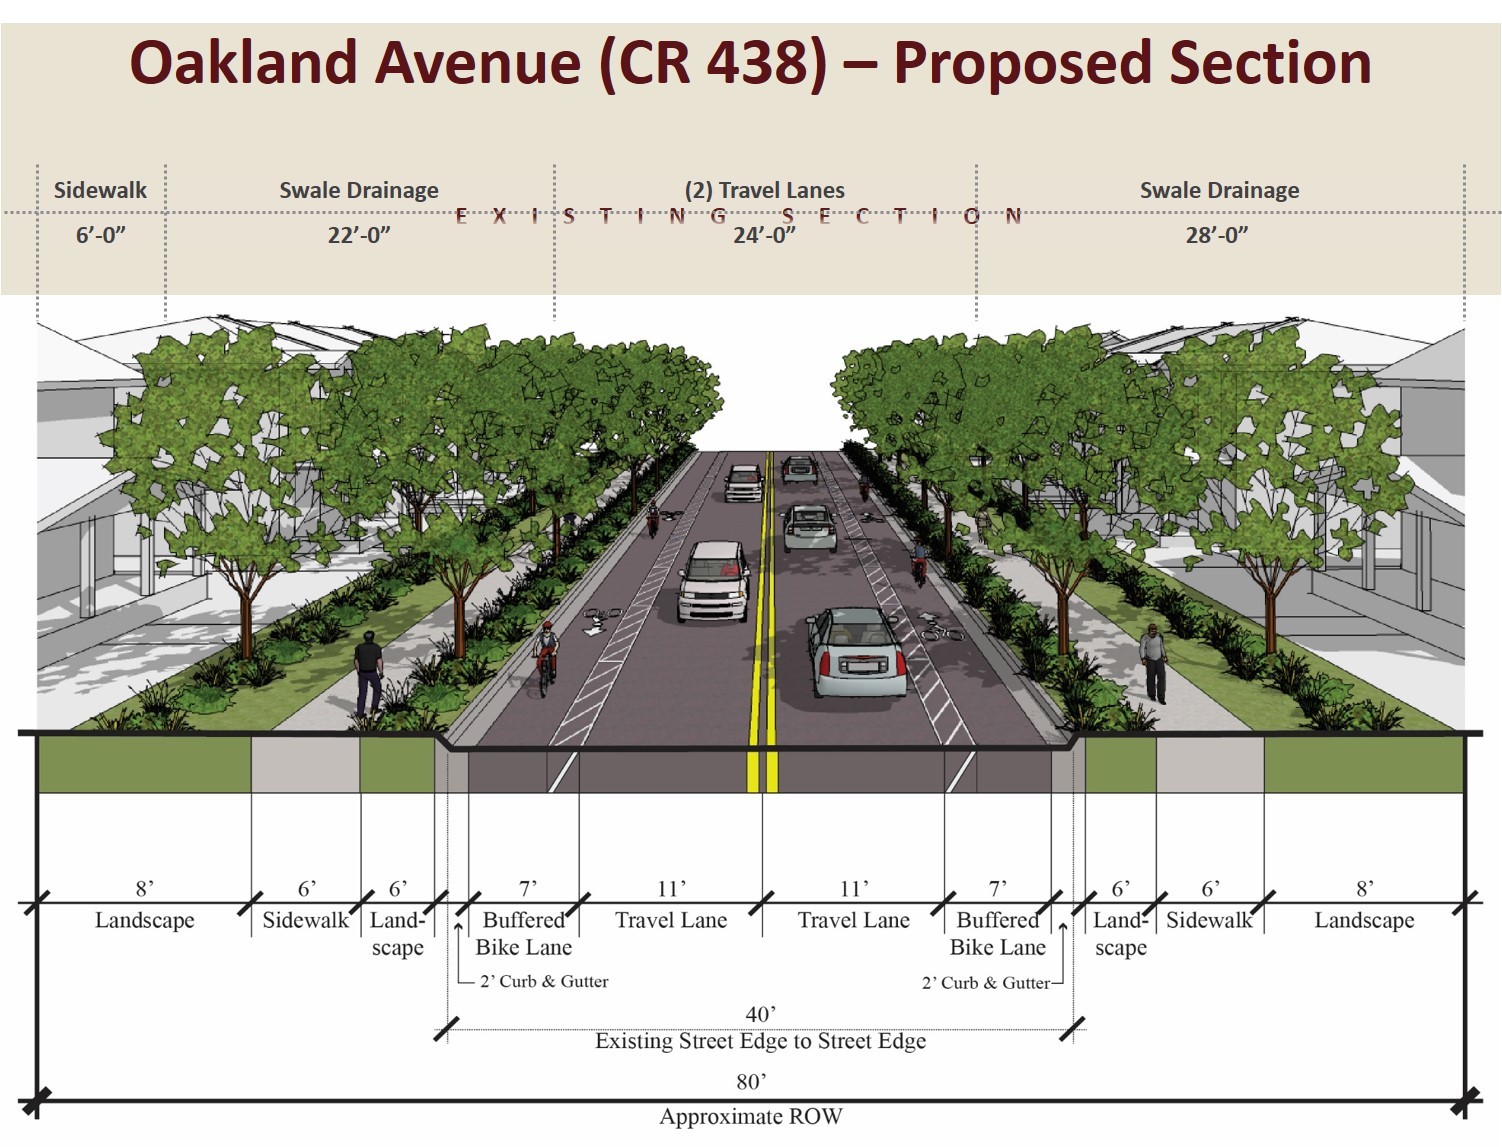 This proposal takes into consideration buffered bike lanes, lane widths reduced to 11 feet and consistent sidewalks and street trees.